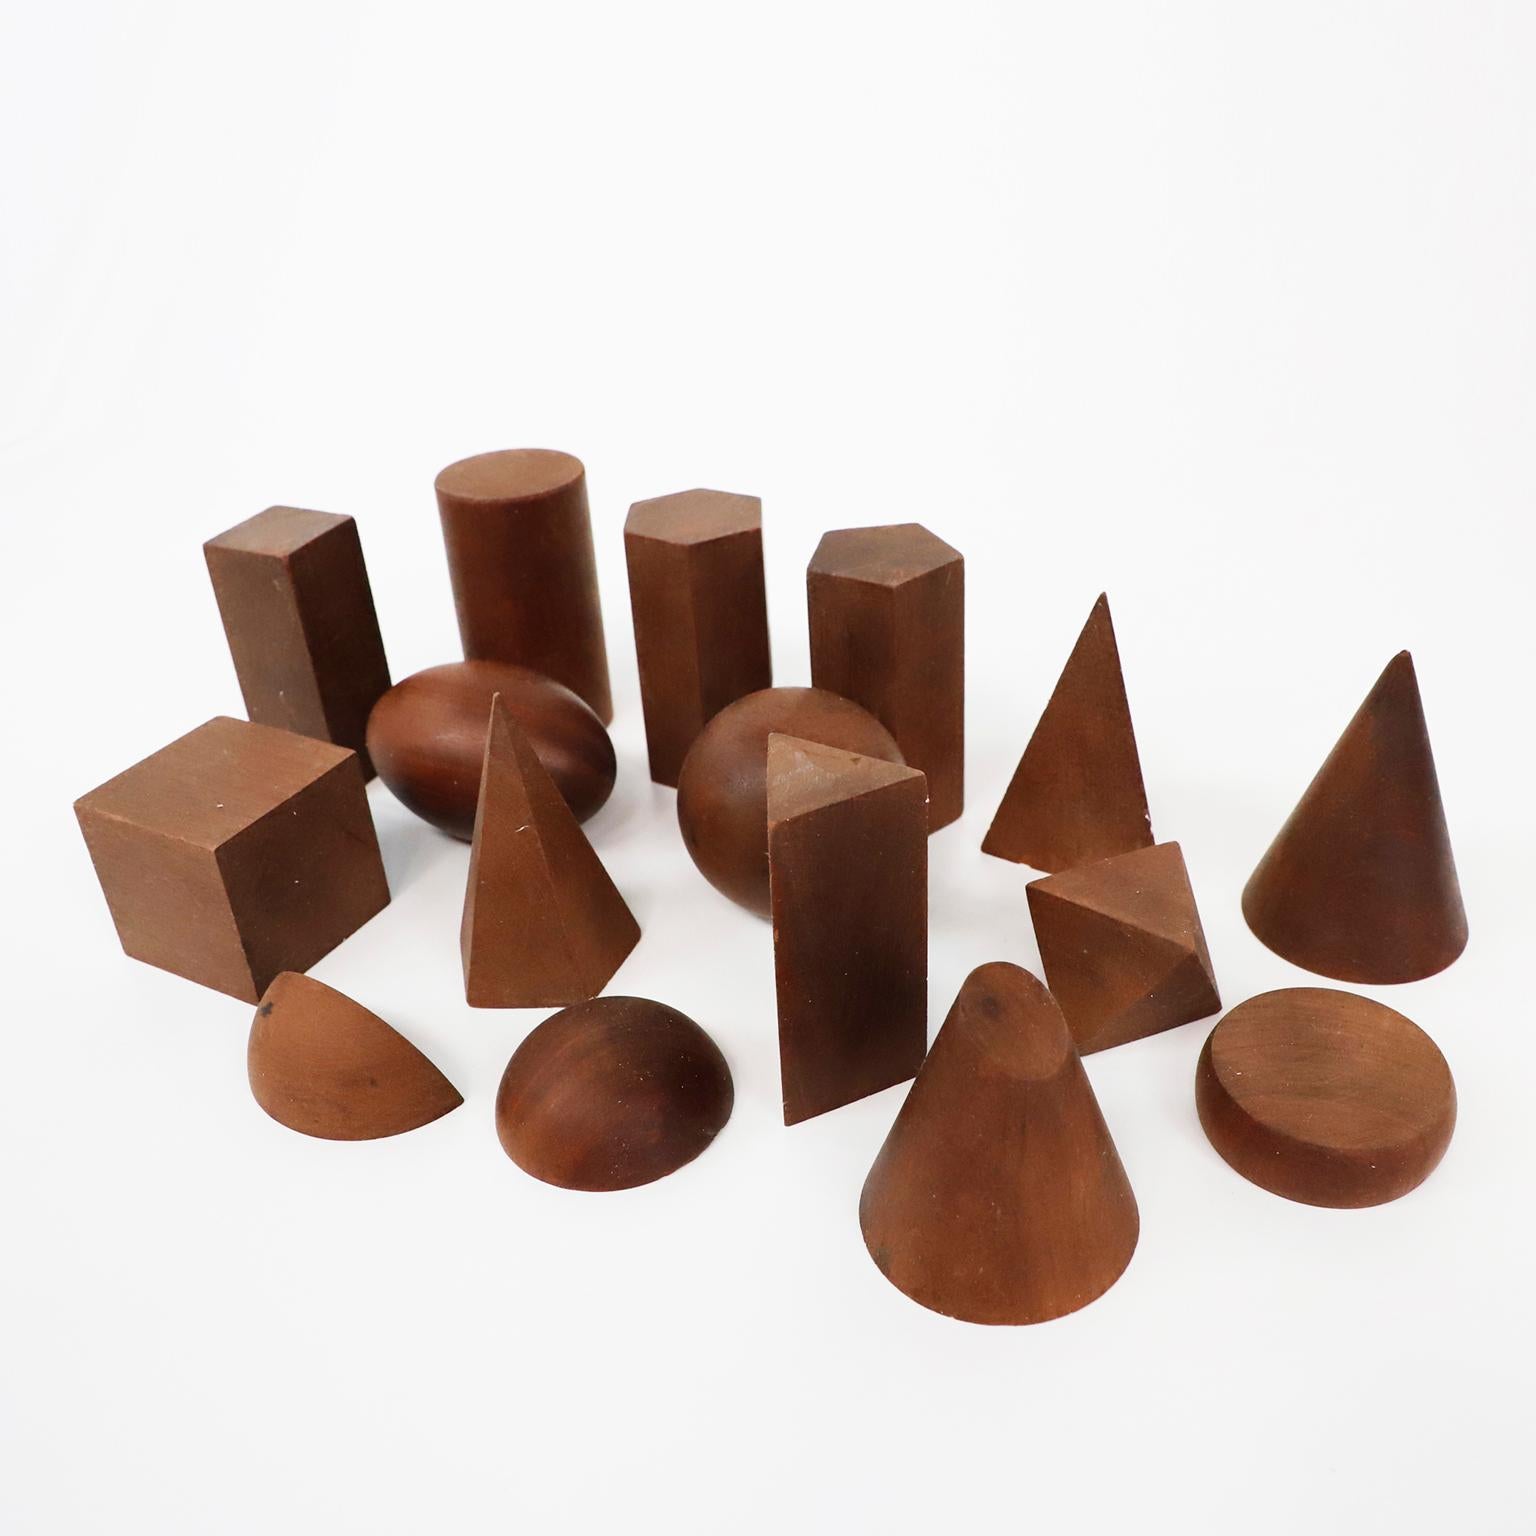 circa 1940. We offer this set of 16 vintage wooden geometric shapes. These wooden models were used in teaching solid geometry and mathematics.